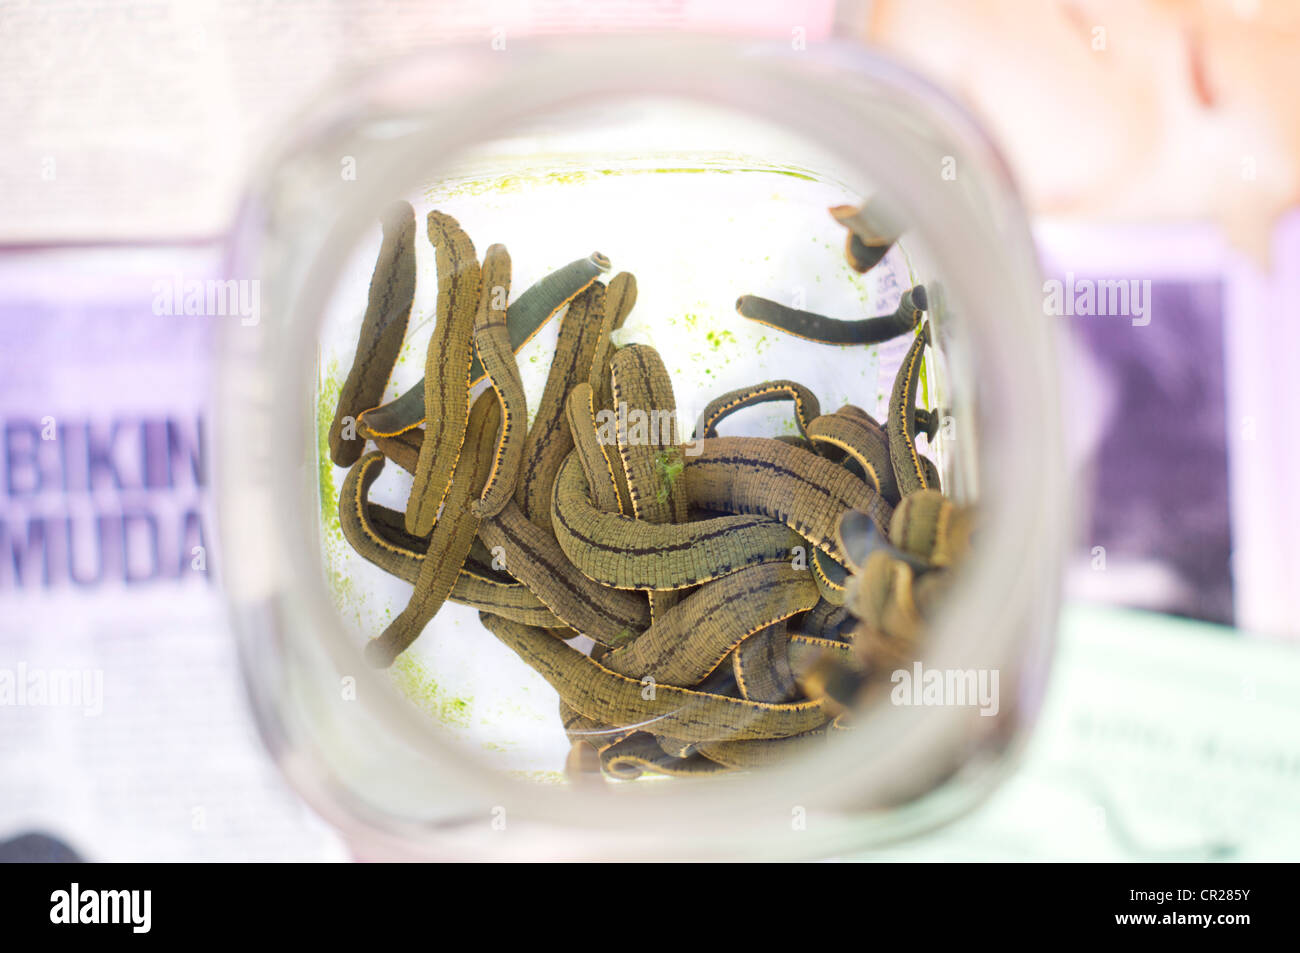 Medicinal leeches are for sale in jar, it is used as alternate therapy in Indonesia. Photo is taken at Sumatra of Indonesia. Stock Photo